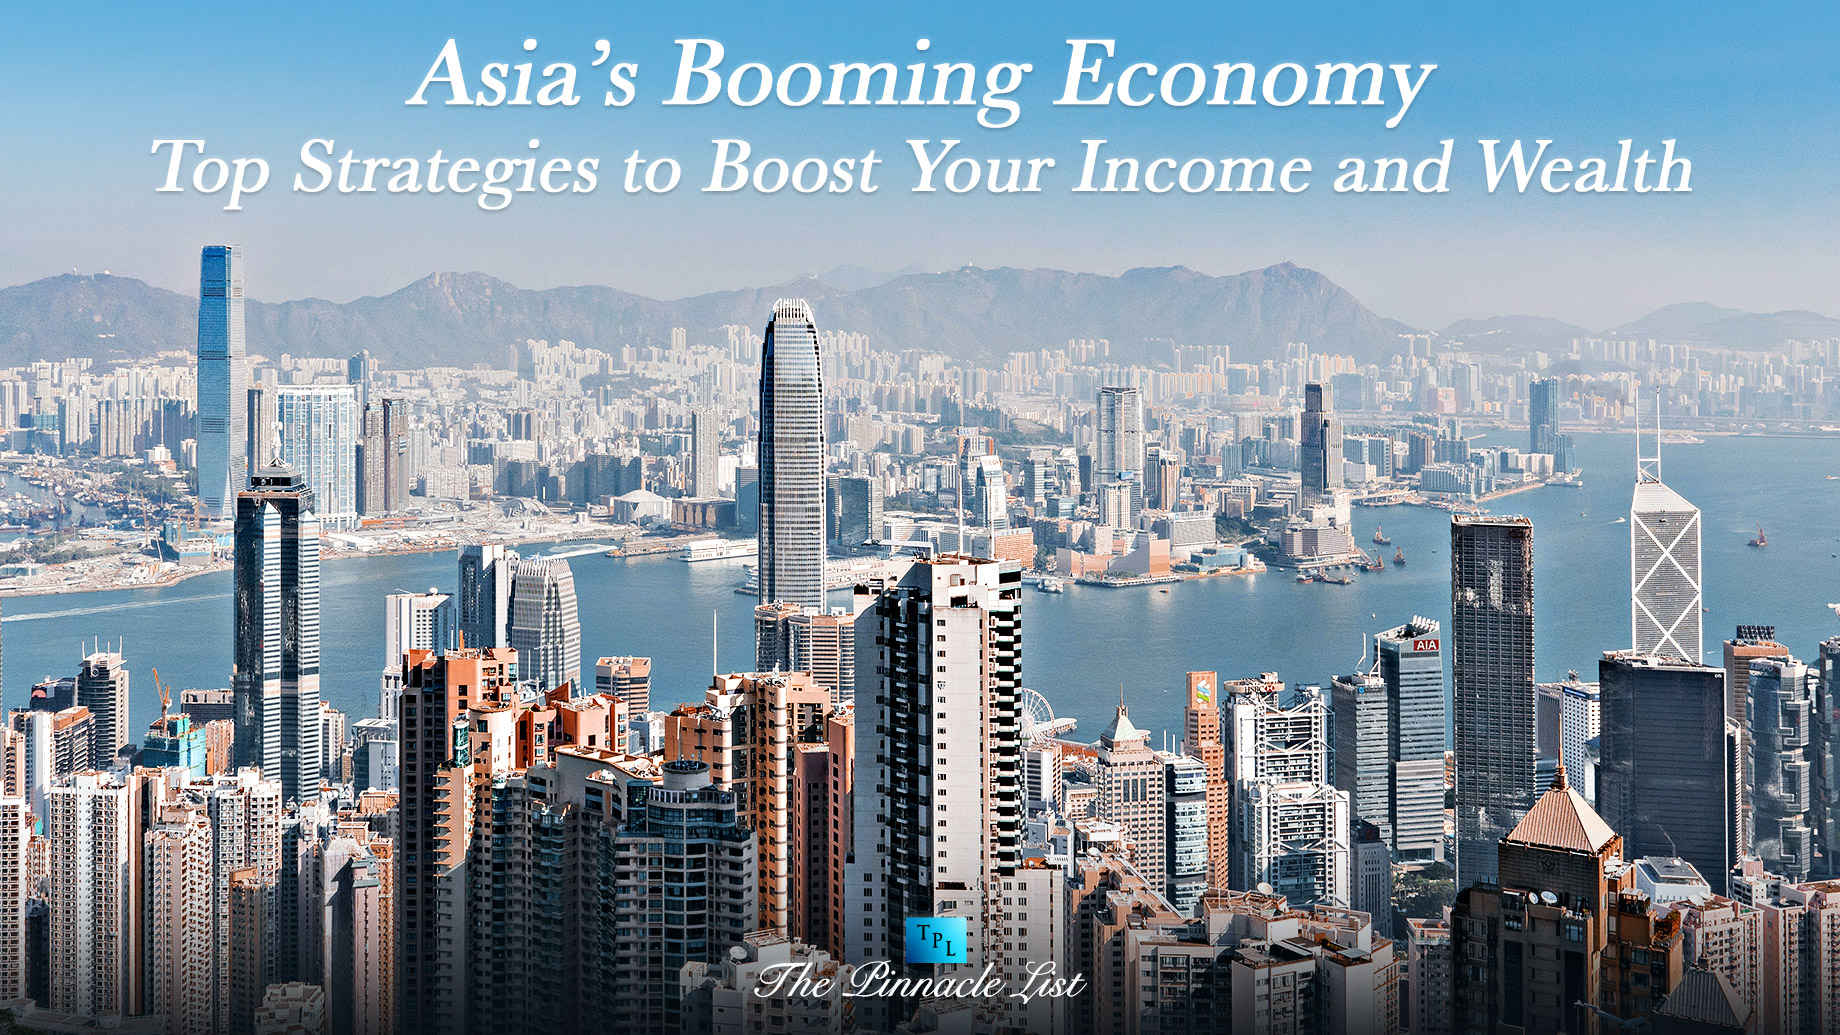 Asia’s Booming Economy: Top Strategies to Boost Your Income and Wealth